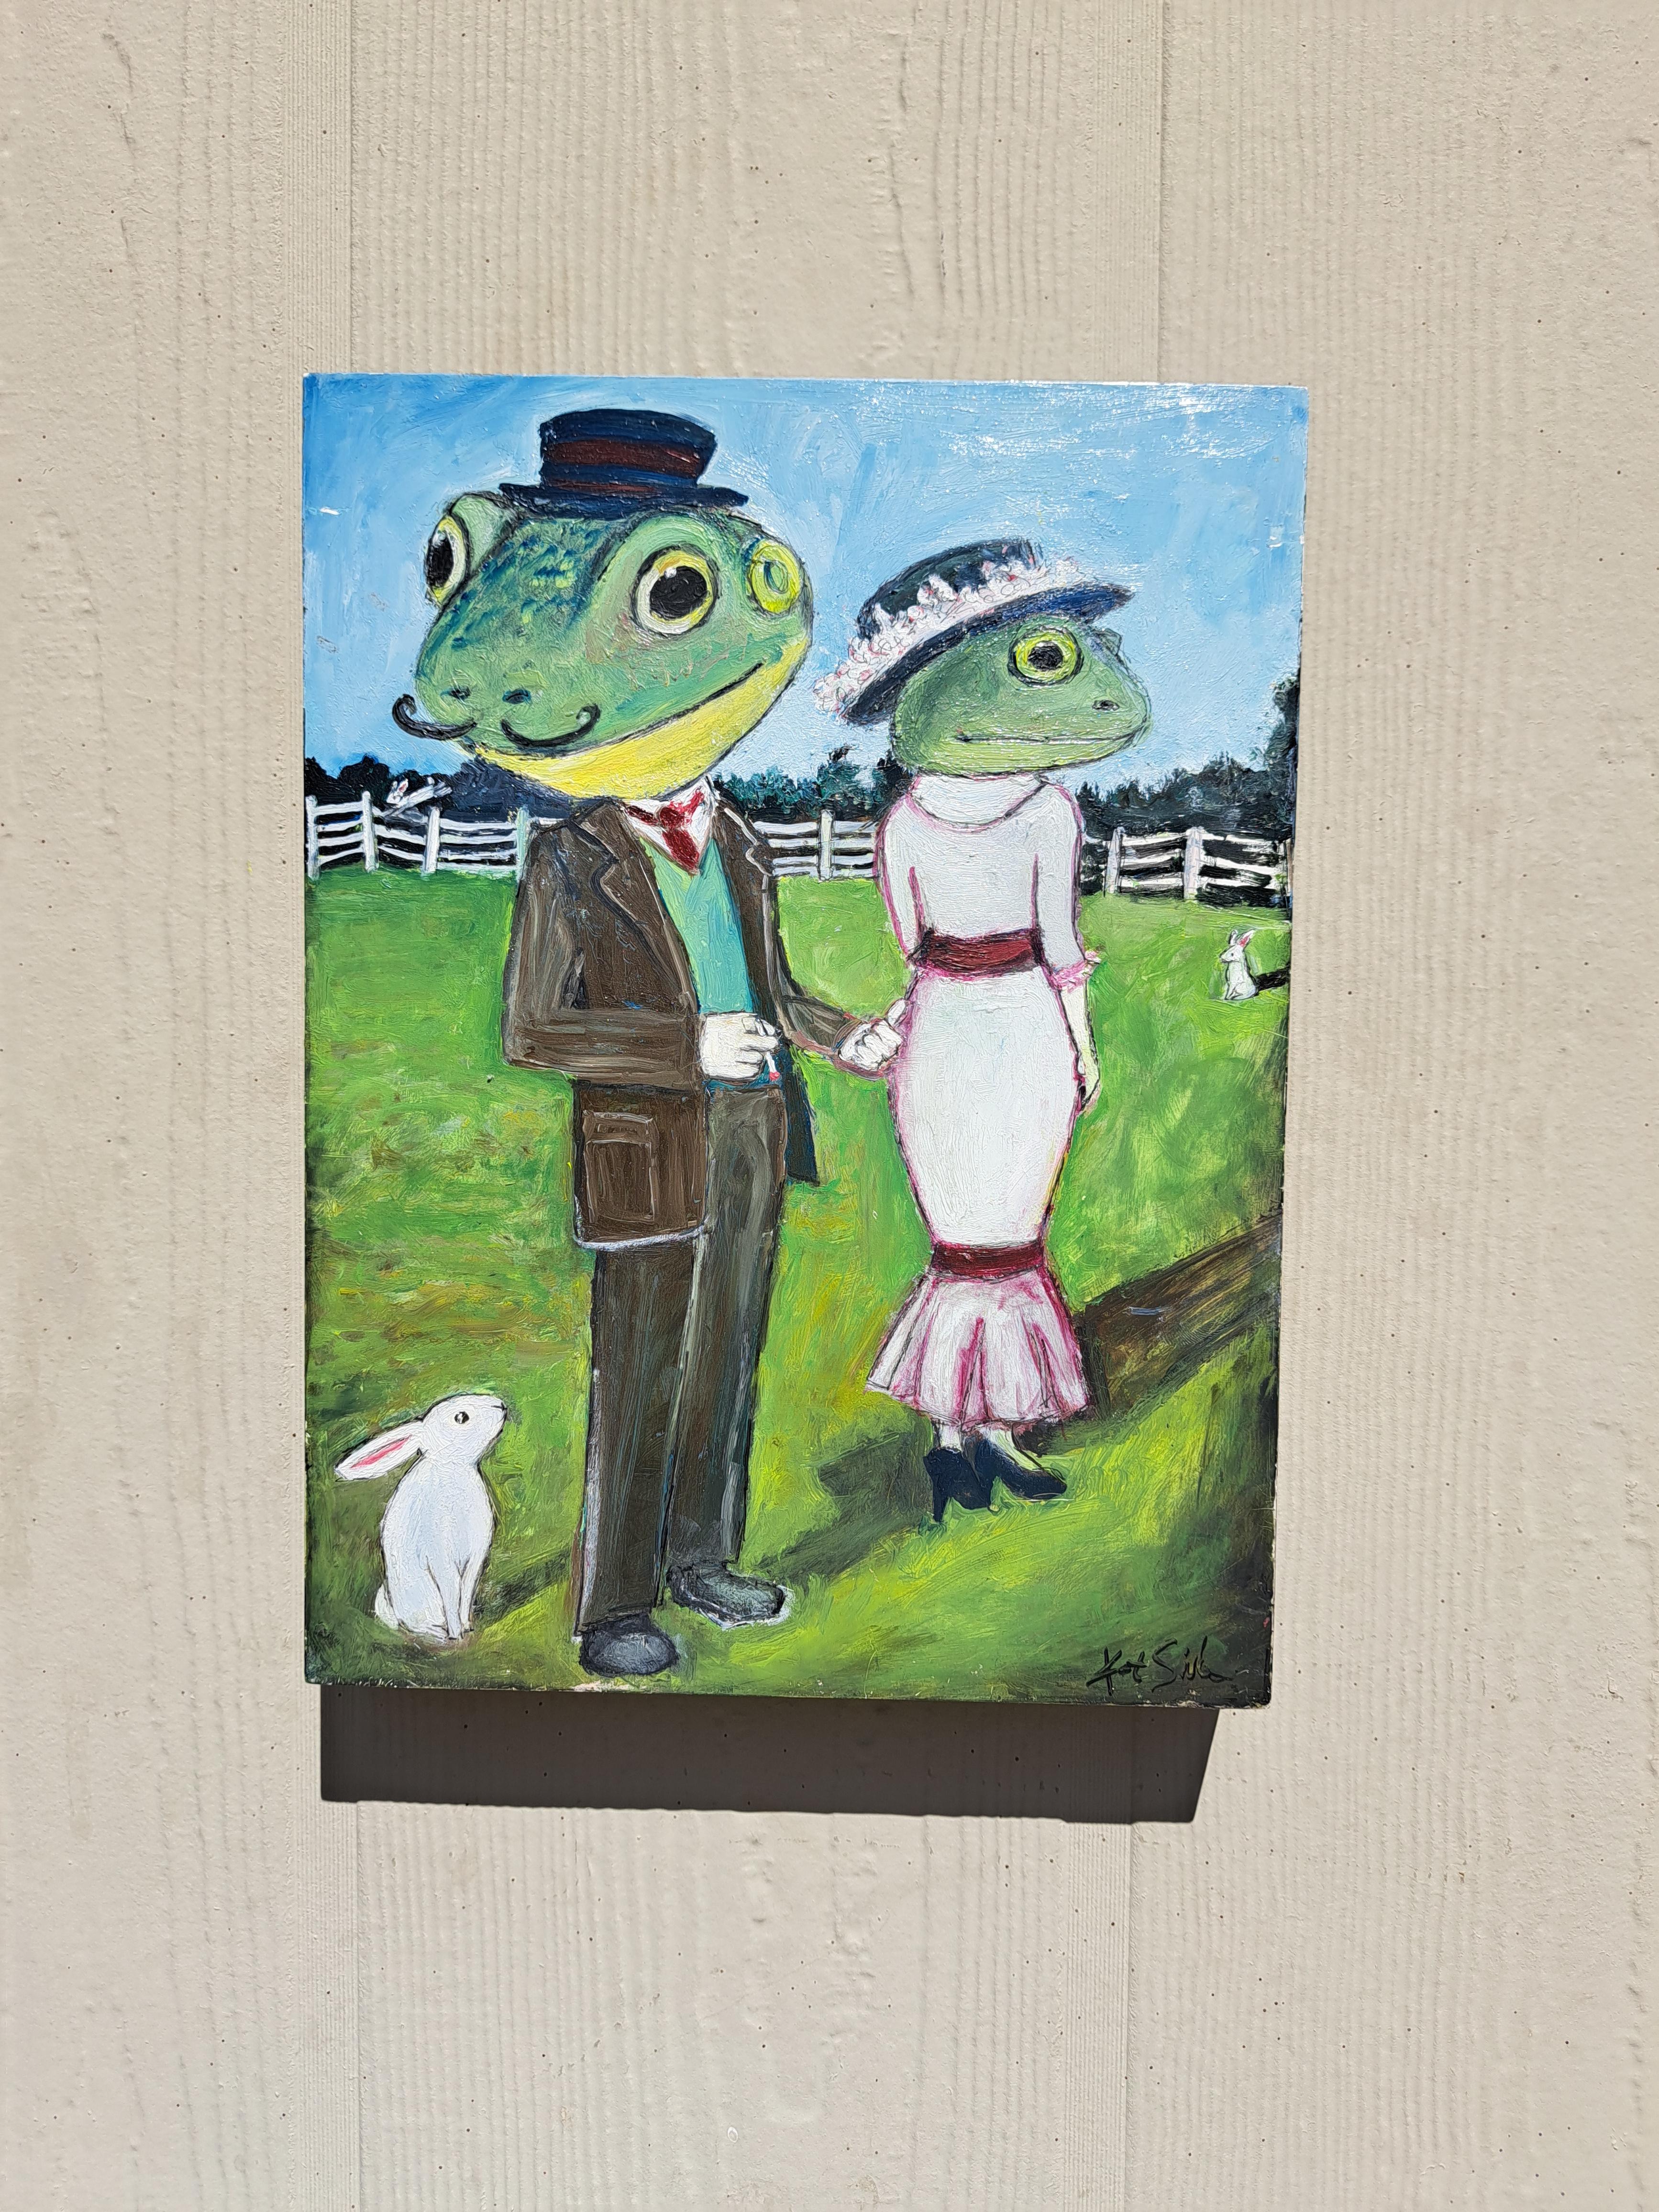 <p>Artist Comments<br>An old-timey frog couple stands together, but they seem to be miles apart. The artwork delves into the profound exploration of human connections, revealing how even within the closest bonds, individuals can wear masks and